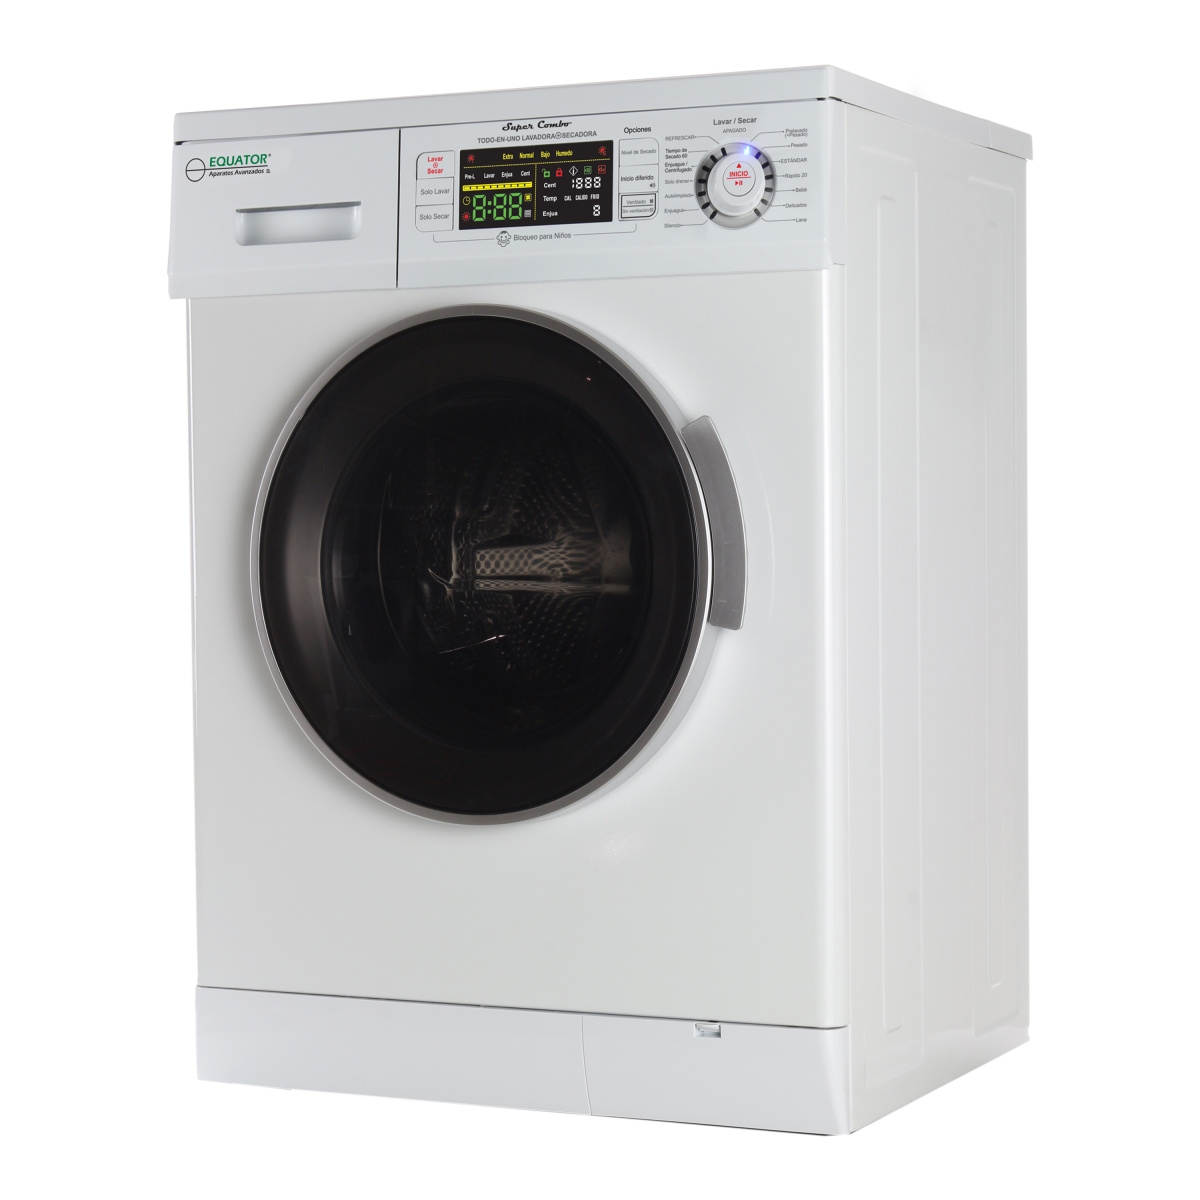 Ez4400 N-w -spa 24 In. Combination Compact Washer & Dryer Combo, White - 2019 Model